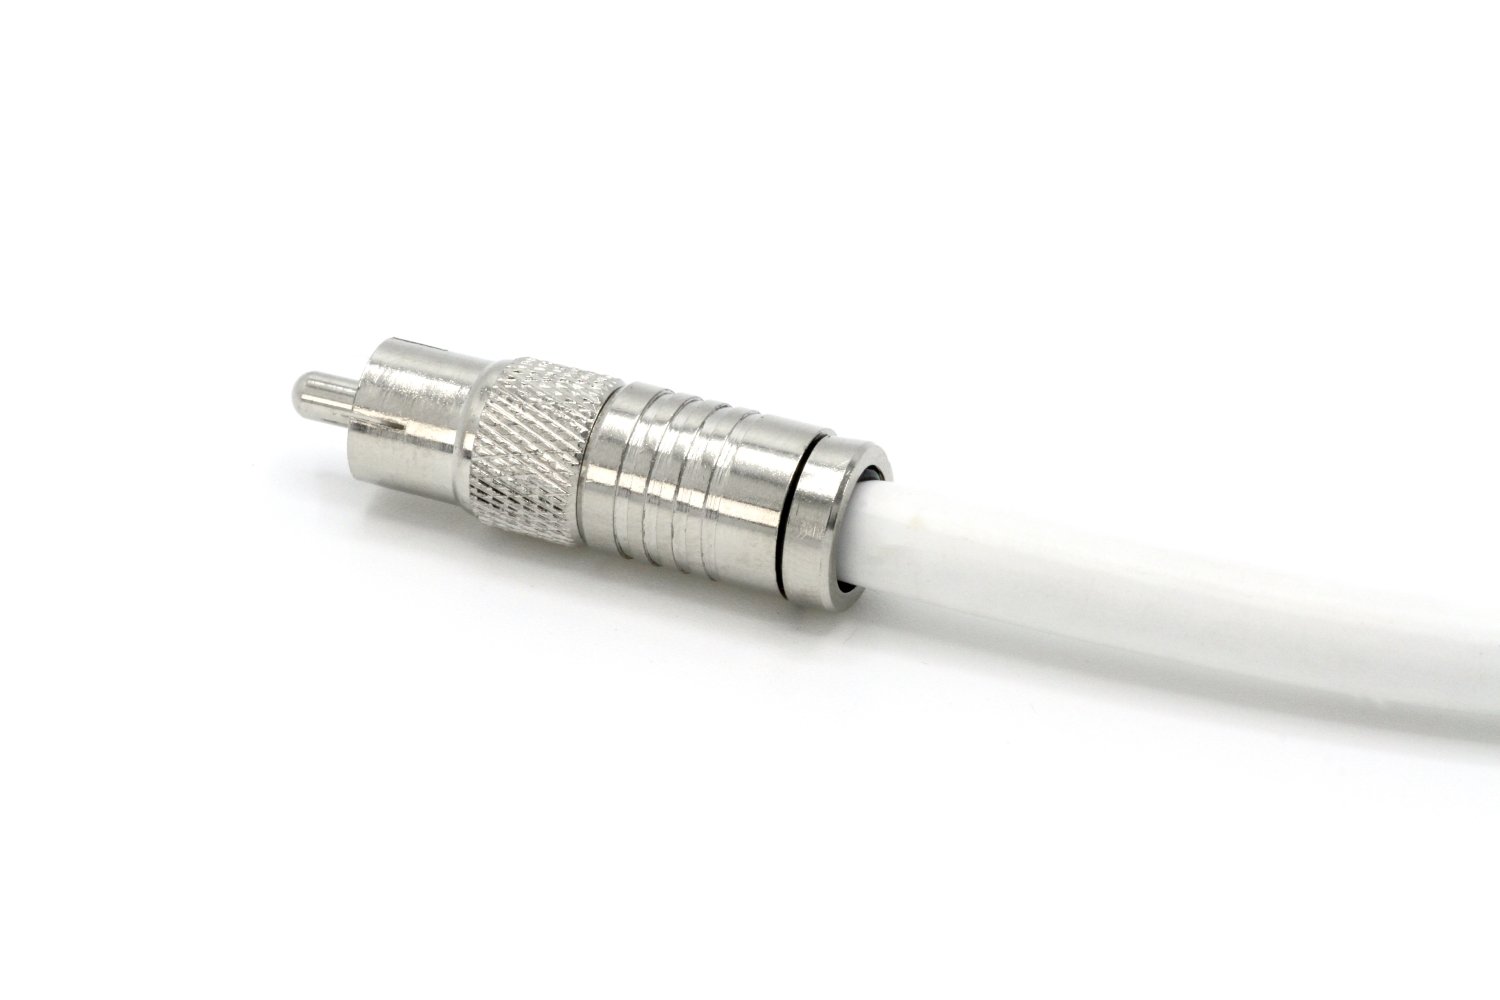 THE CIMPLE CO - White Digital Audio Coaxial Cable Subwoofer Cable - (S/PDIF) RCA Cable, 150 Feet - image 3 of 6